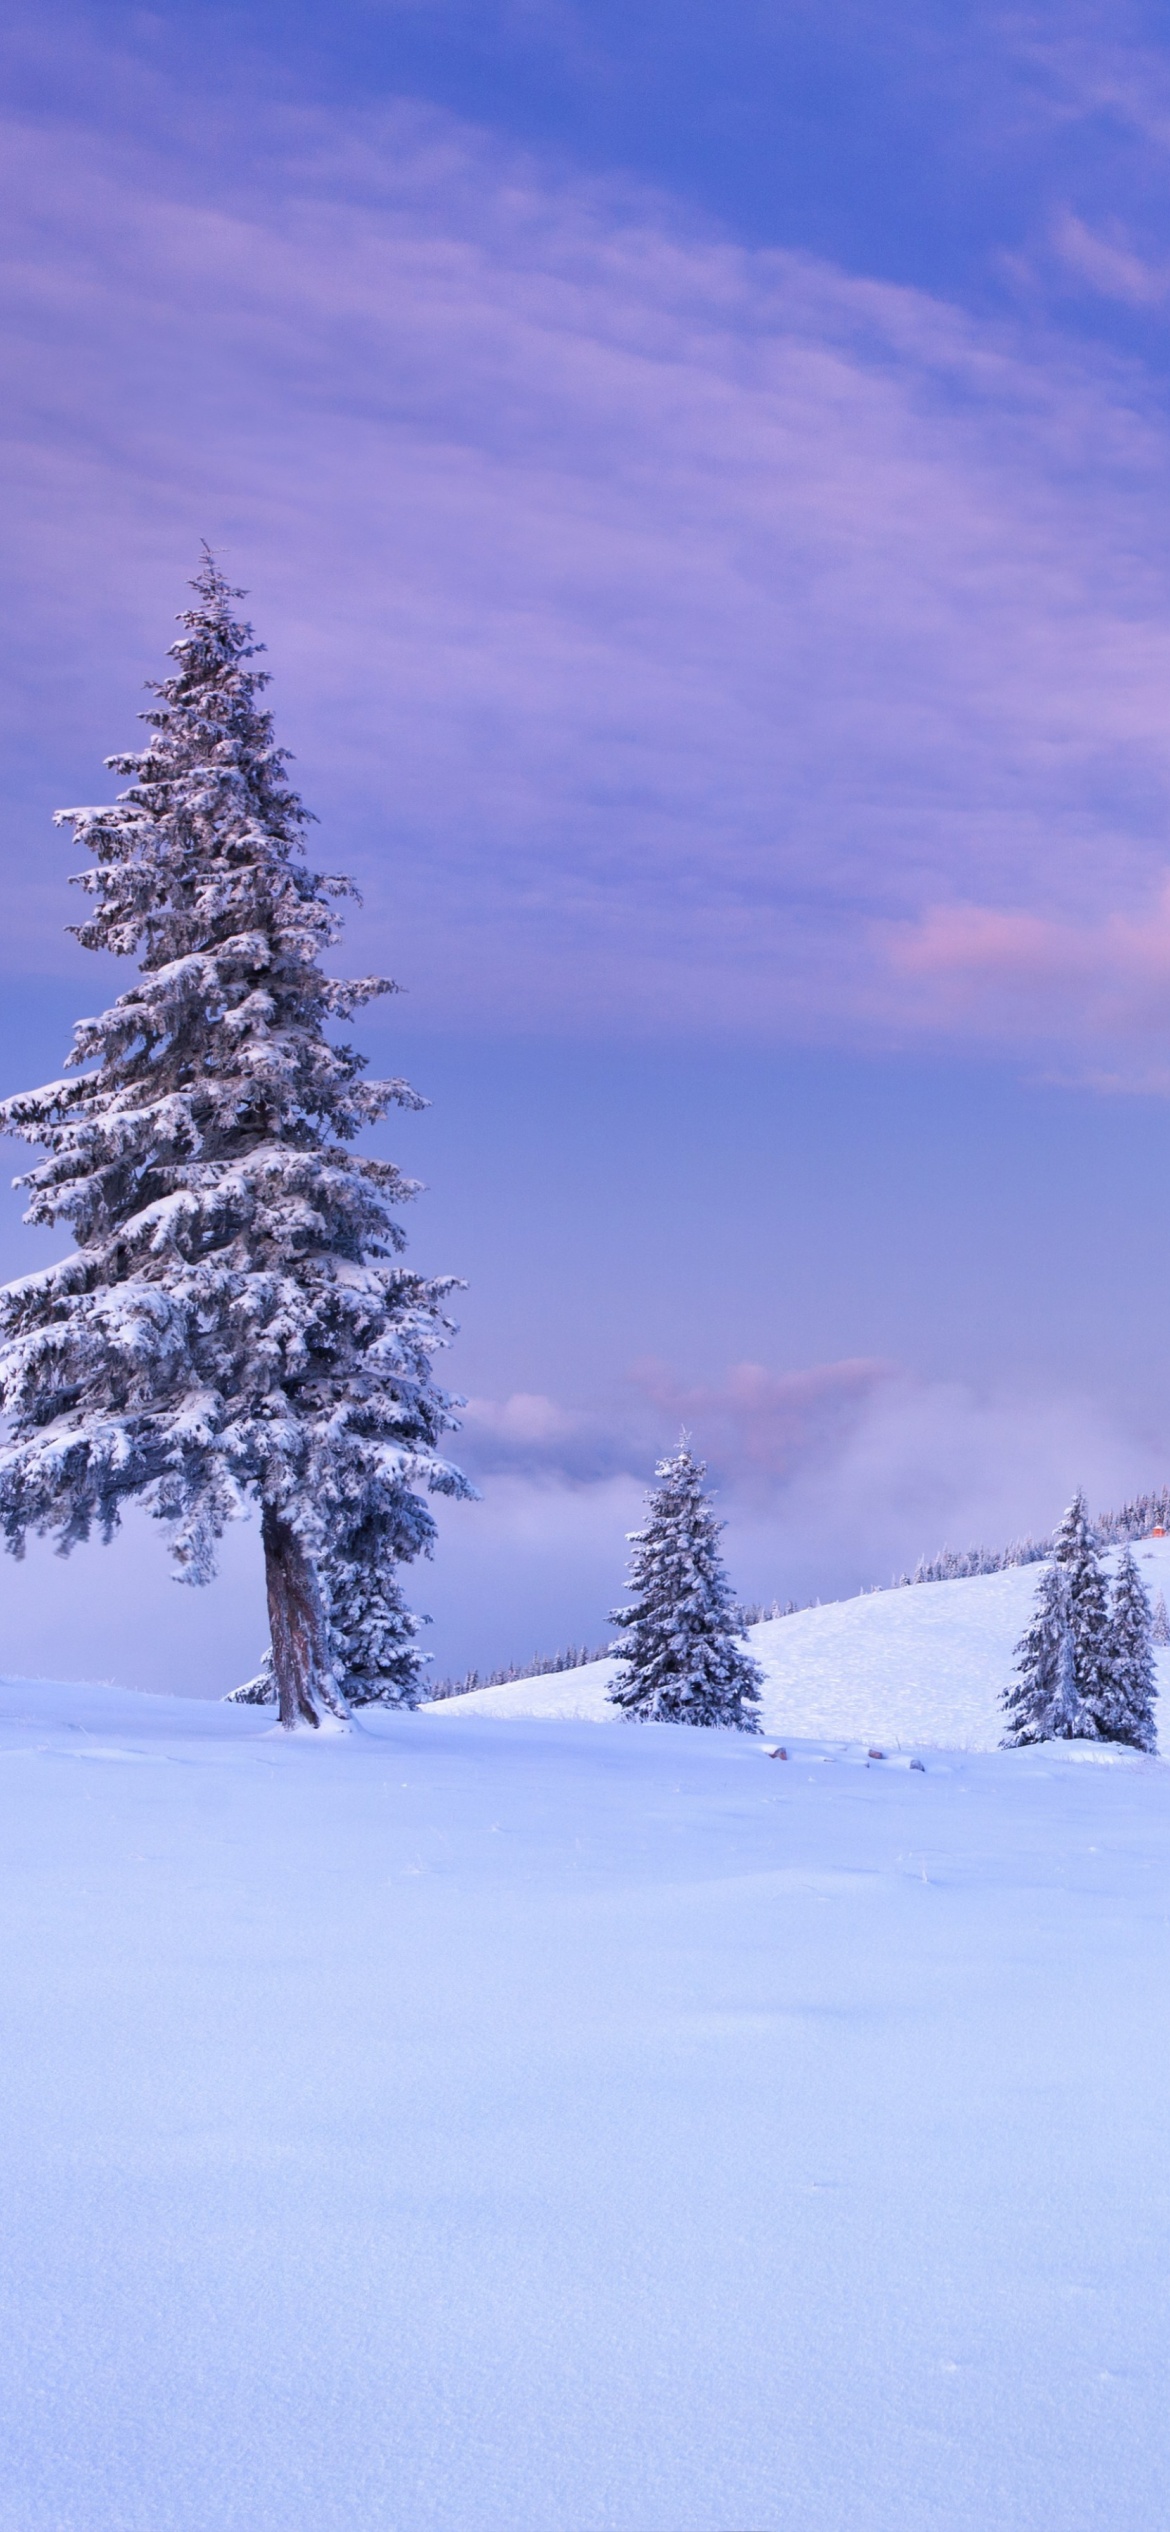 Mountain And Winter Landscape Wallpaper For Iphone 12 Pro